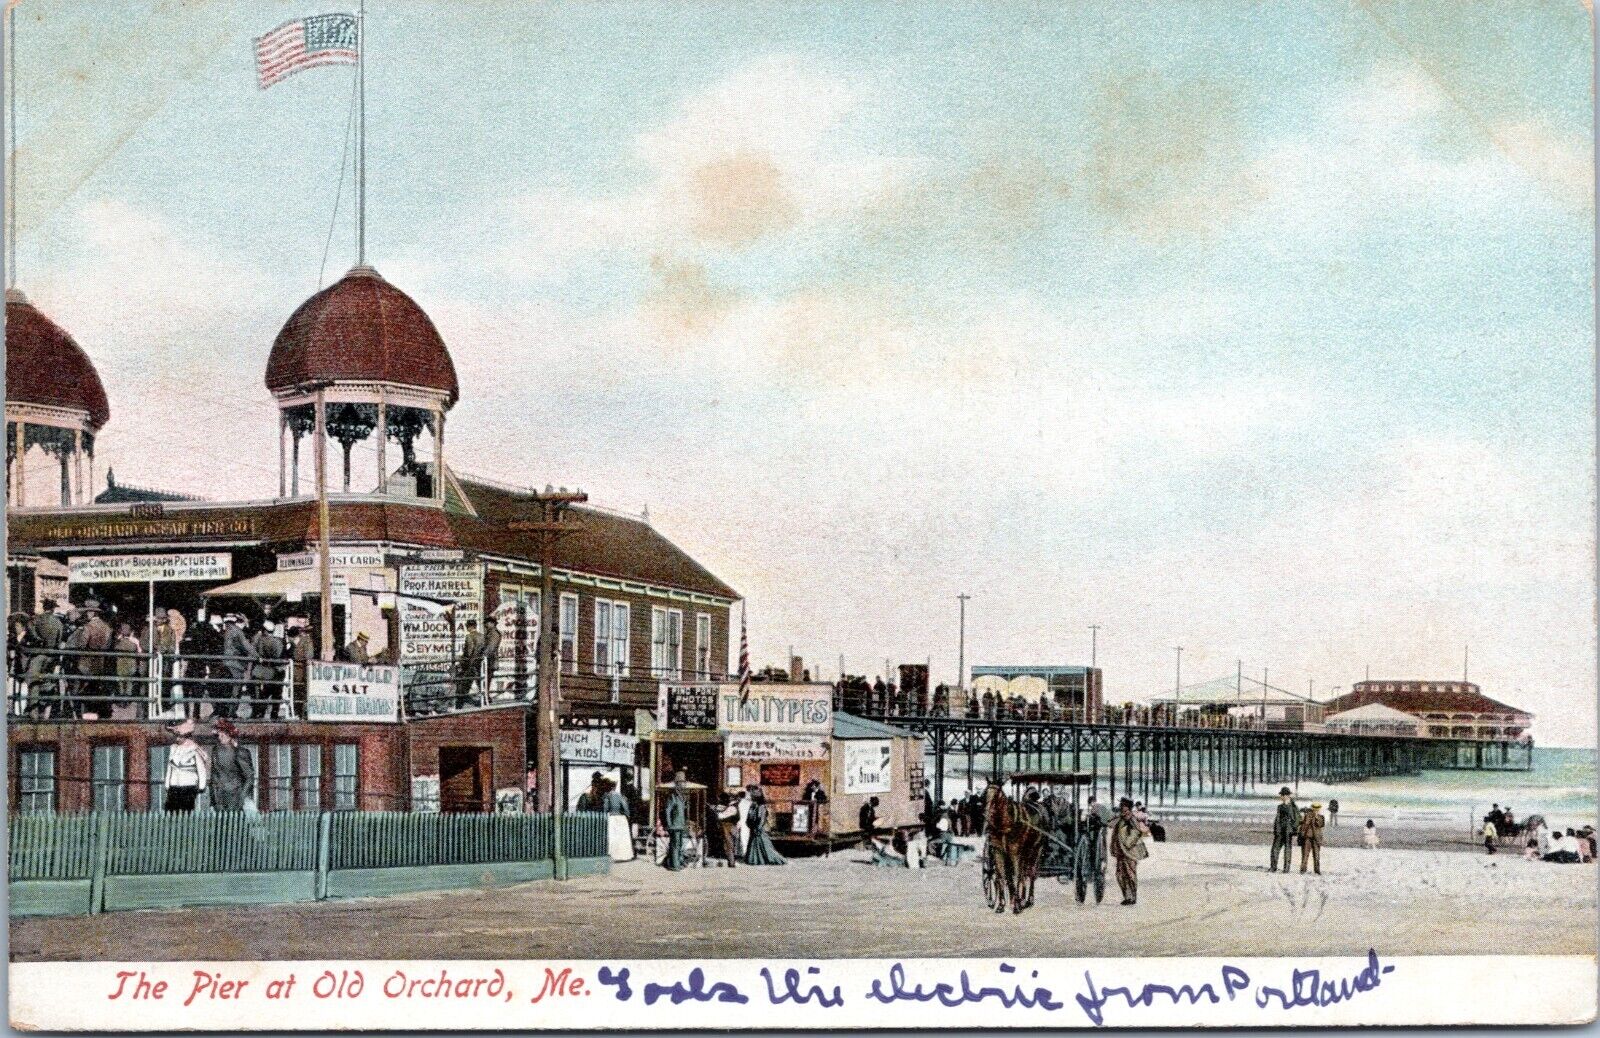 Pier at Old Orchard Maine - c1901-07 udb Postcard - Tintype, Postcard Shops